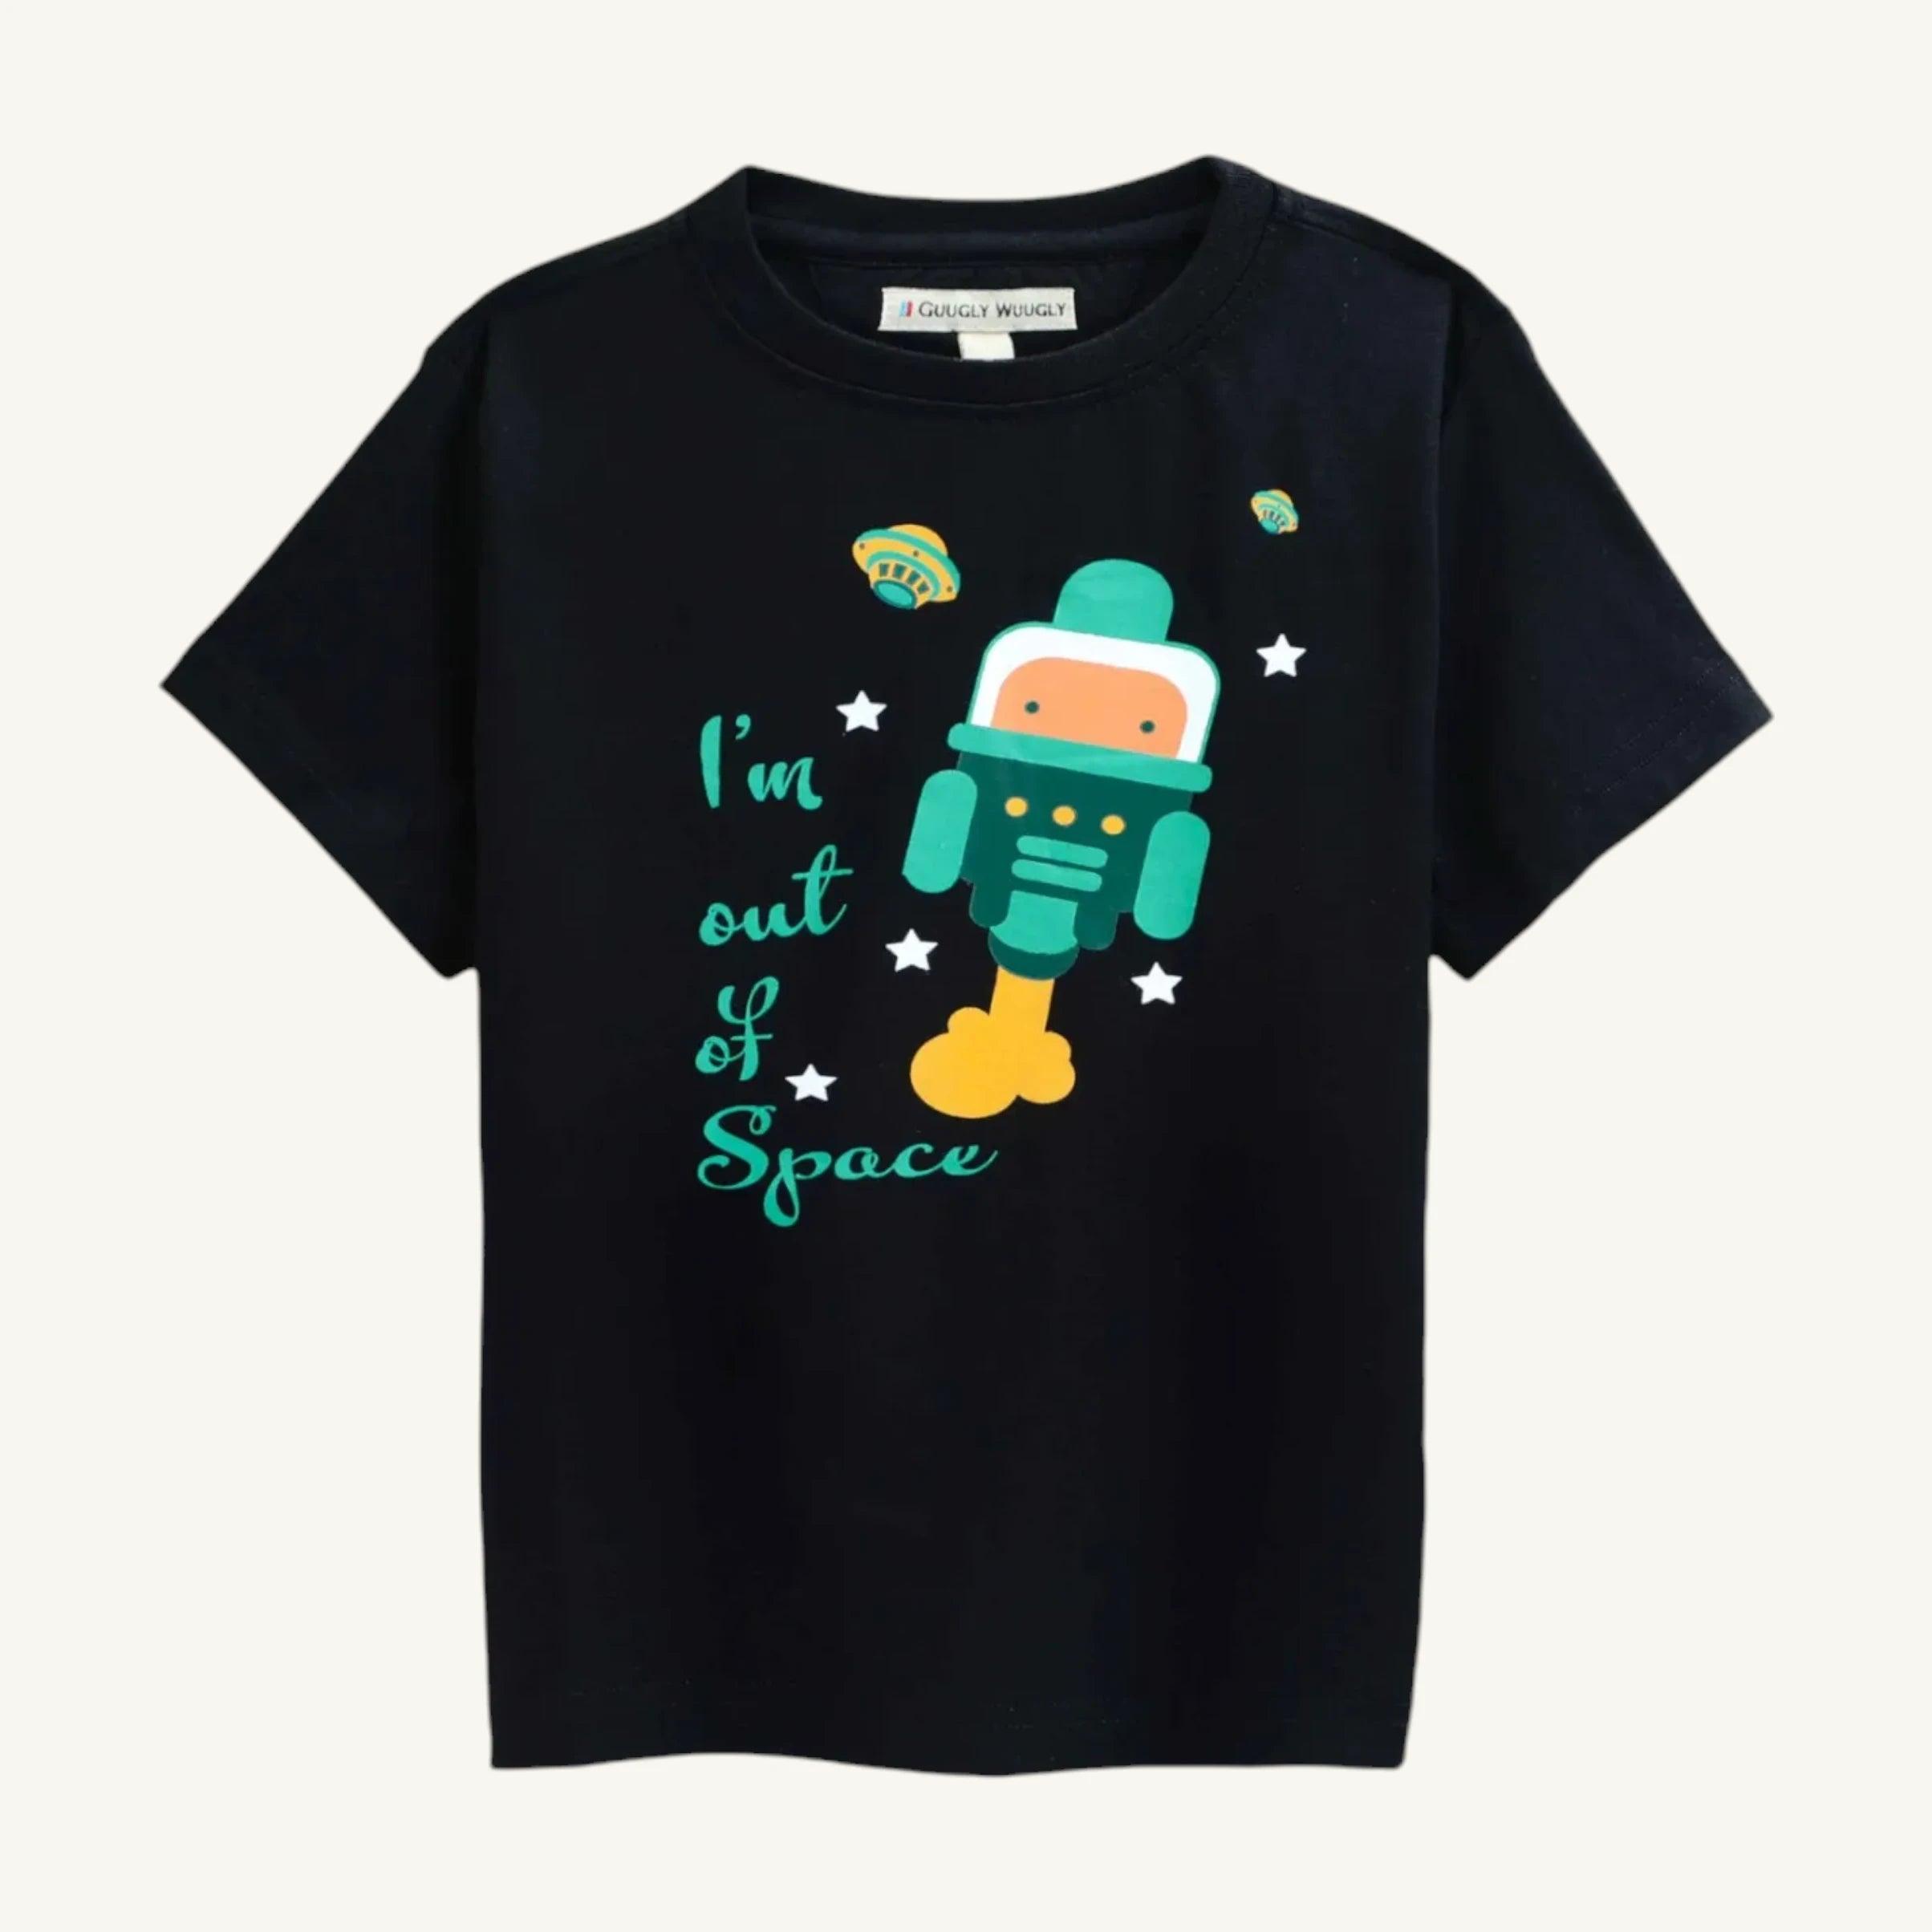 Girls Out of Space T-shirt - Guugly Wuugly